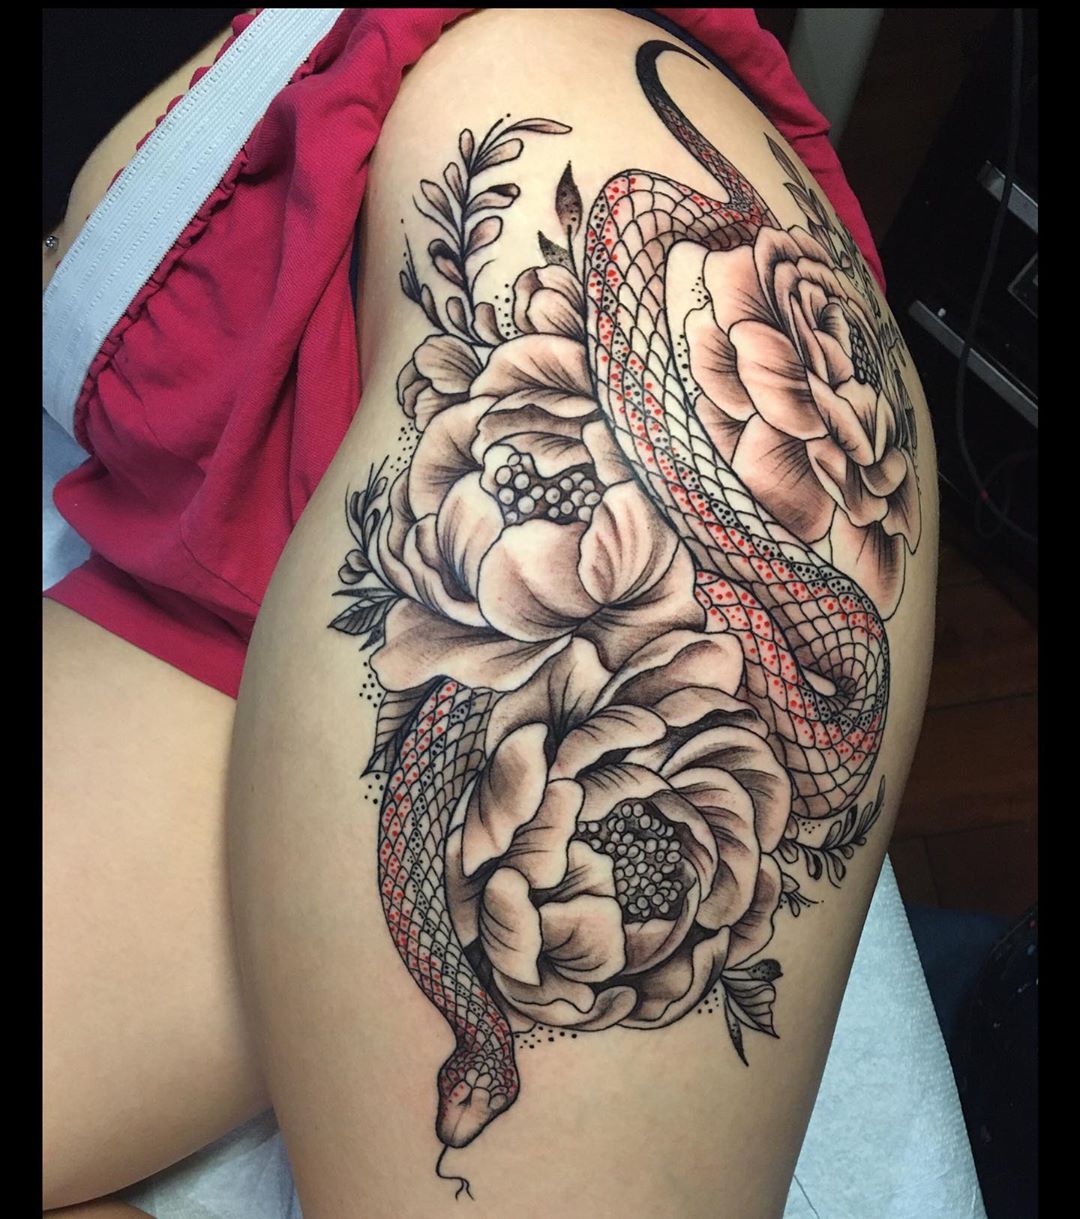 Image of Peony Tattoo with snake design